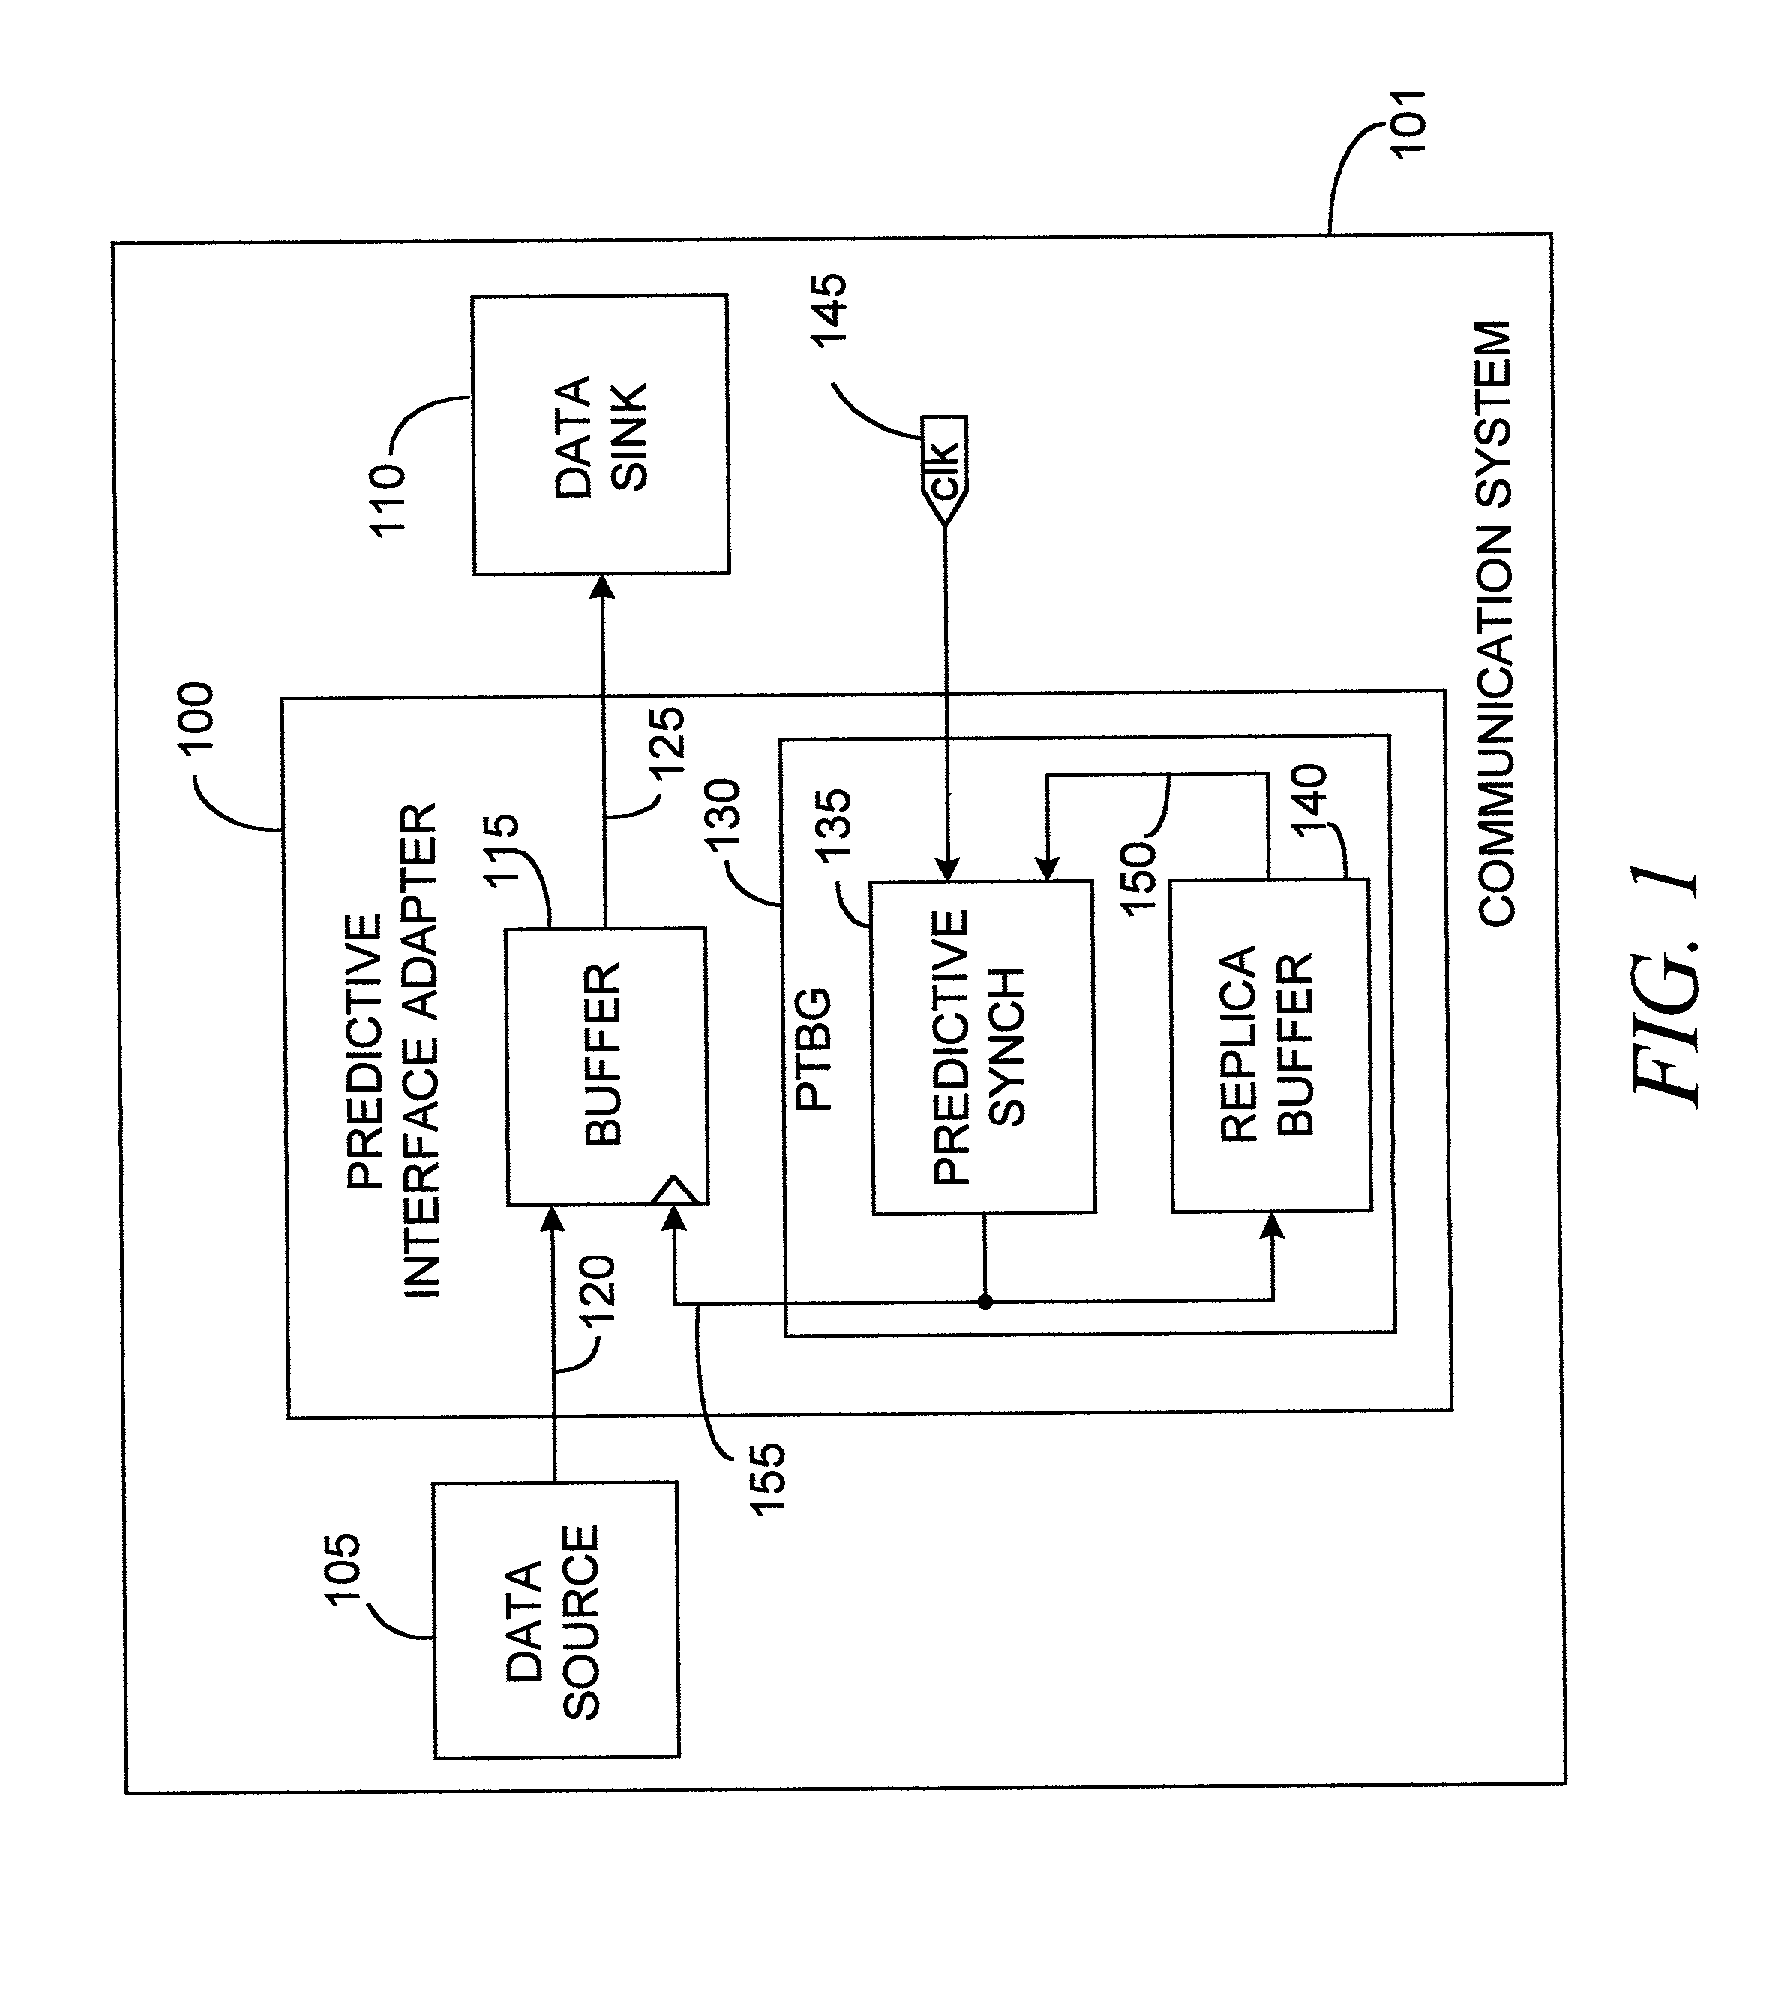 Multiprotocol computer bus interface adapter and method